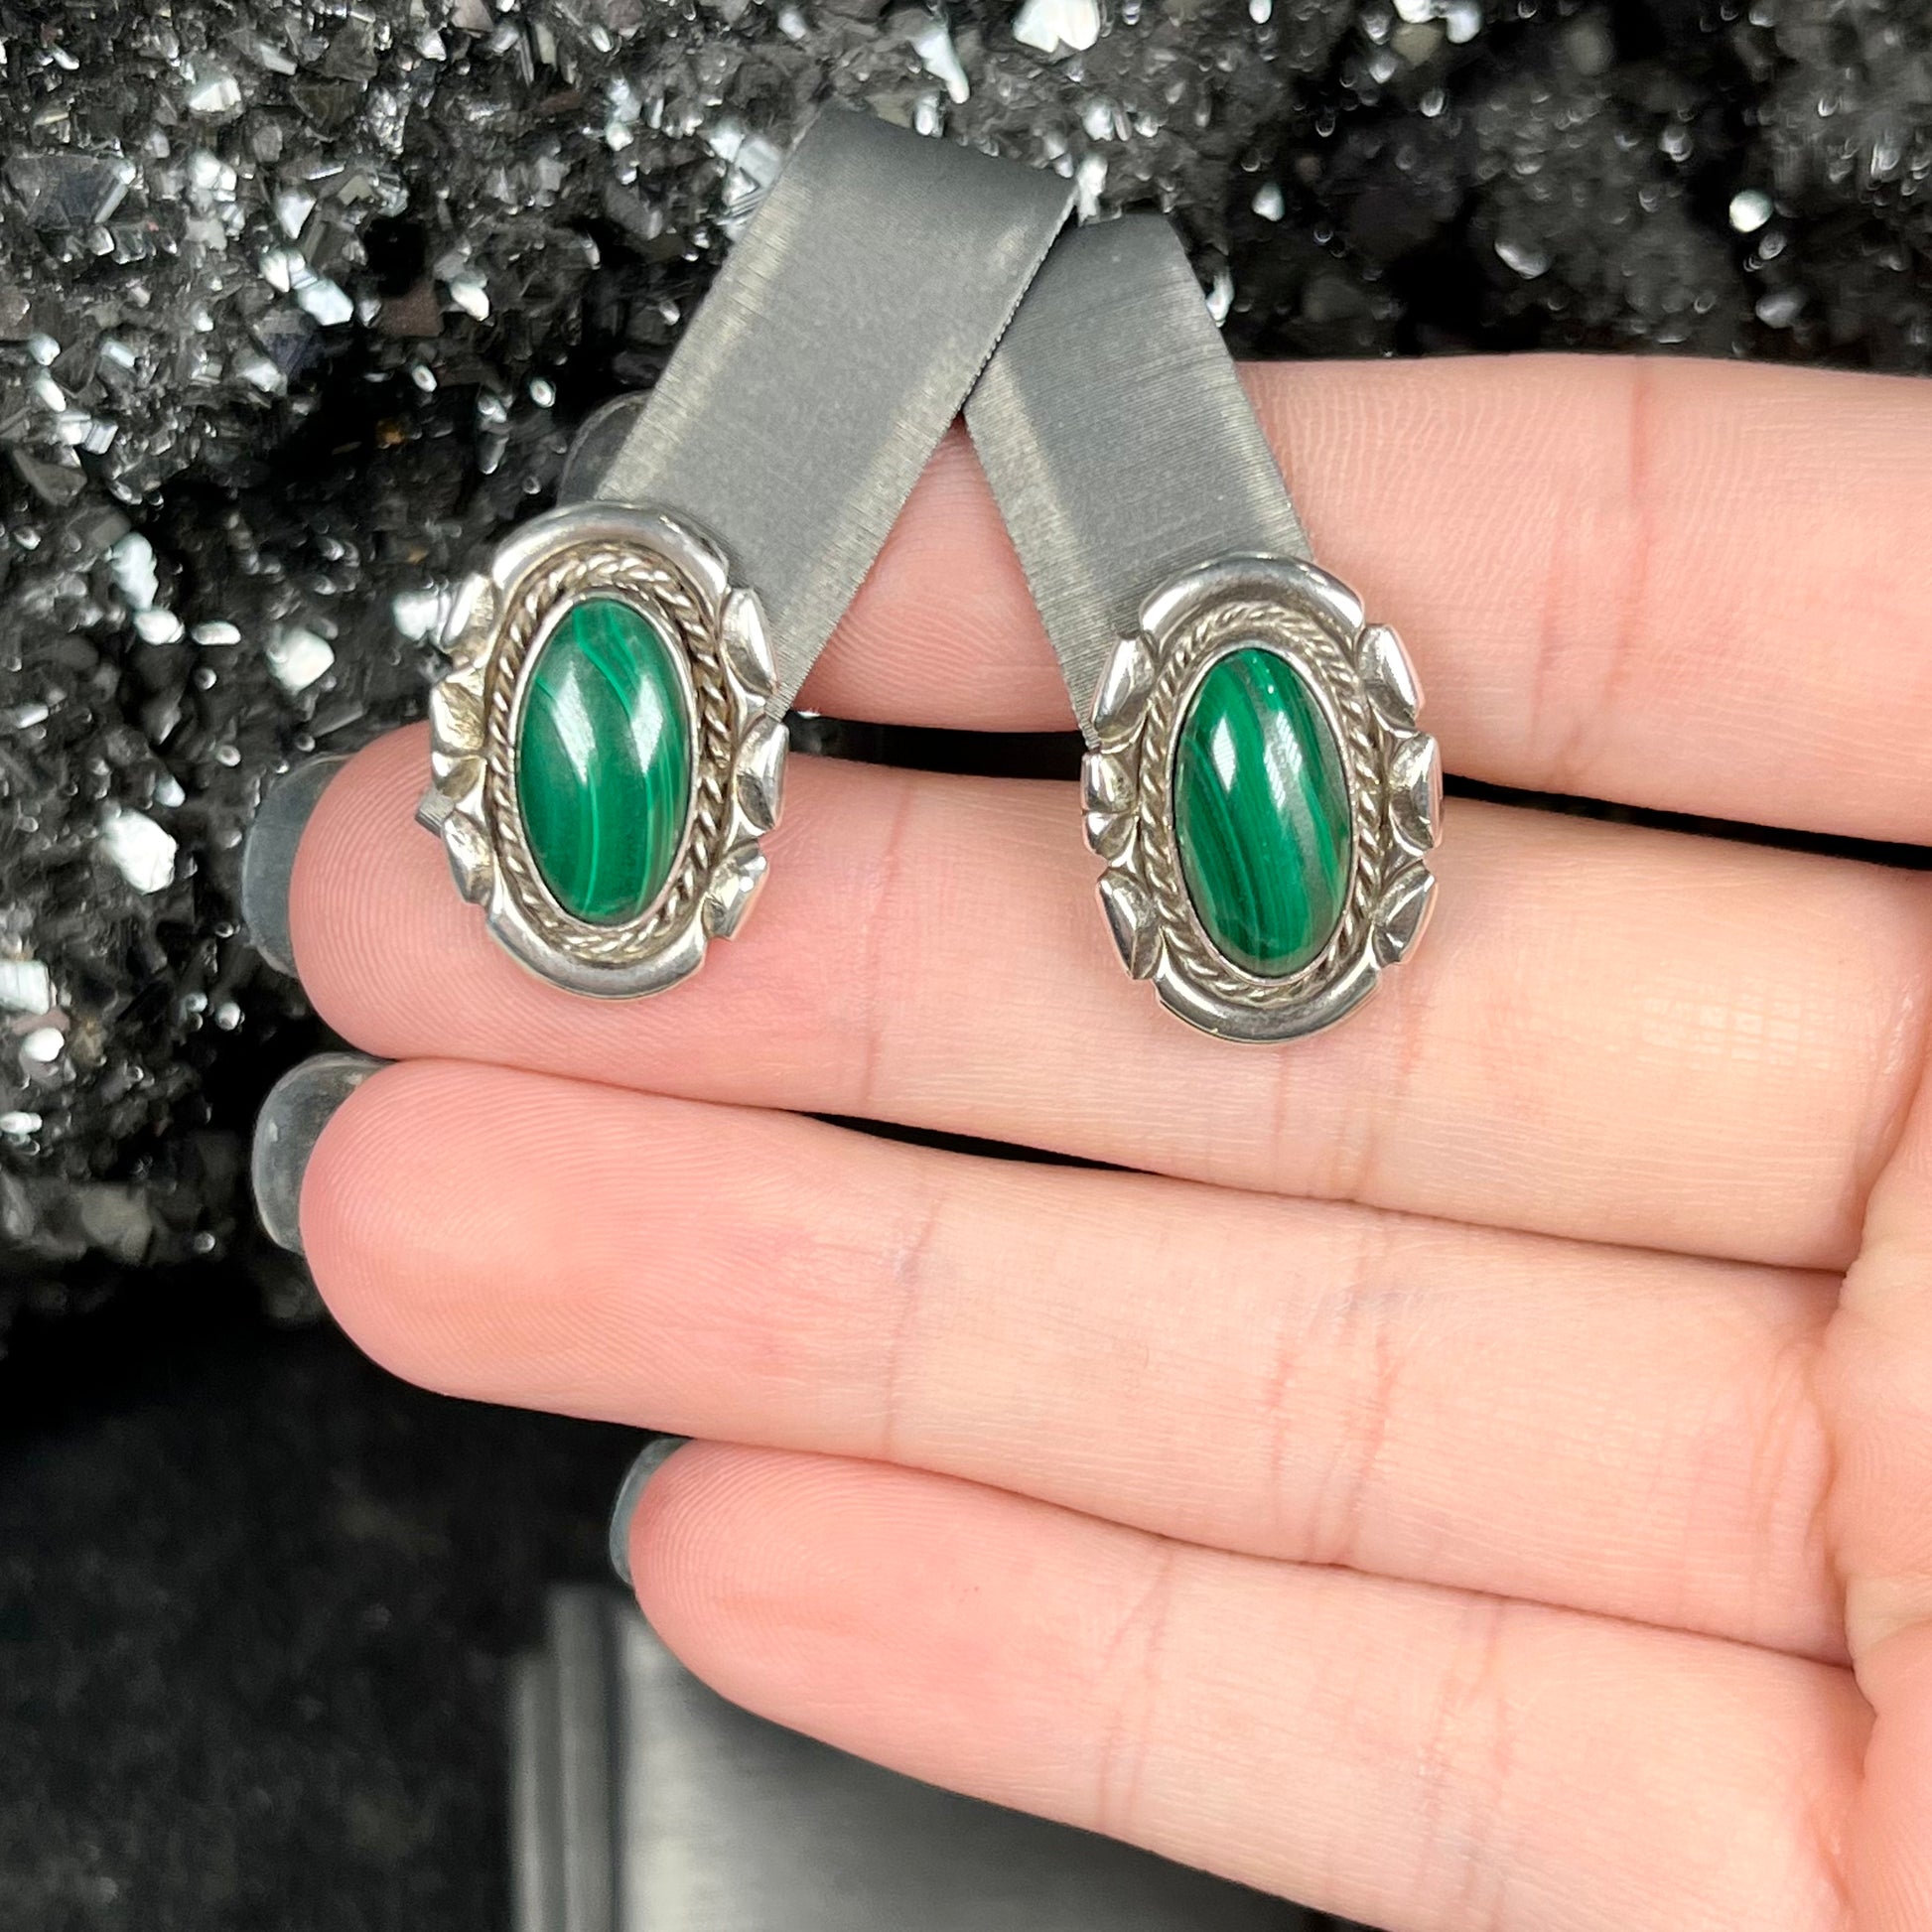 A pair of Southwest style post earrings set with oval cabochon cut malachite stones.